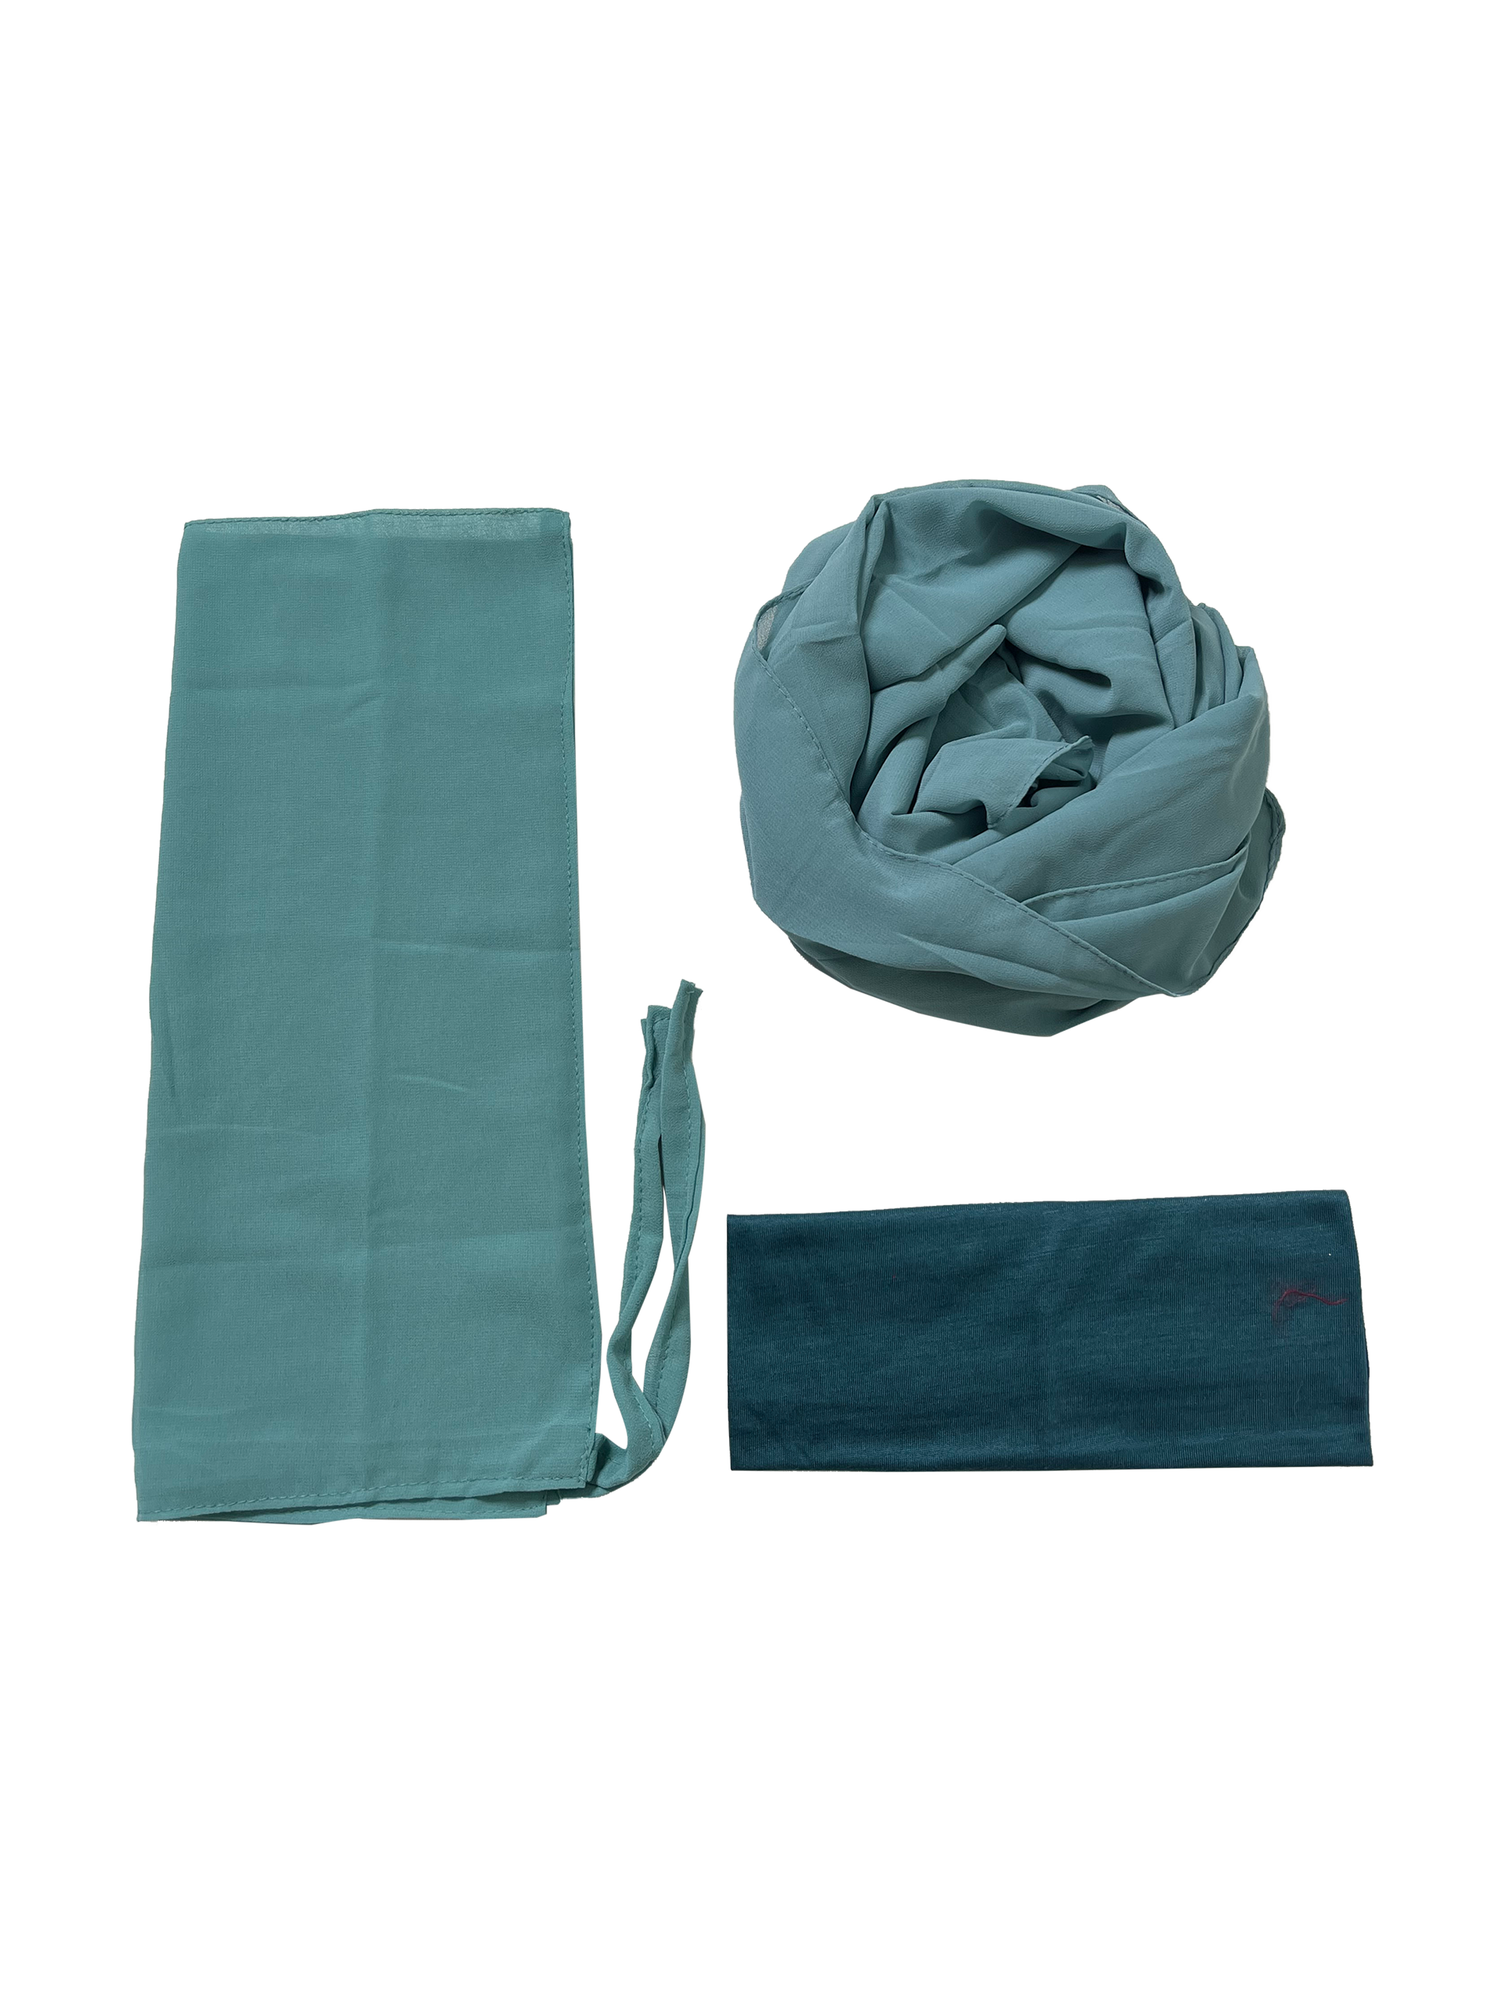 Hijab and Niqab set in Teal Blue